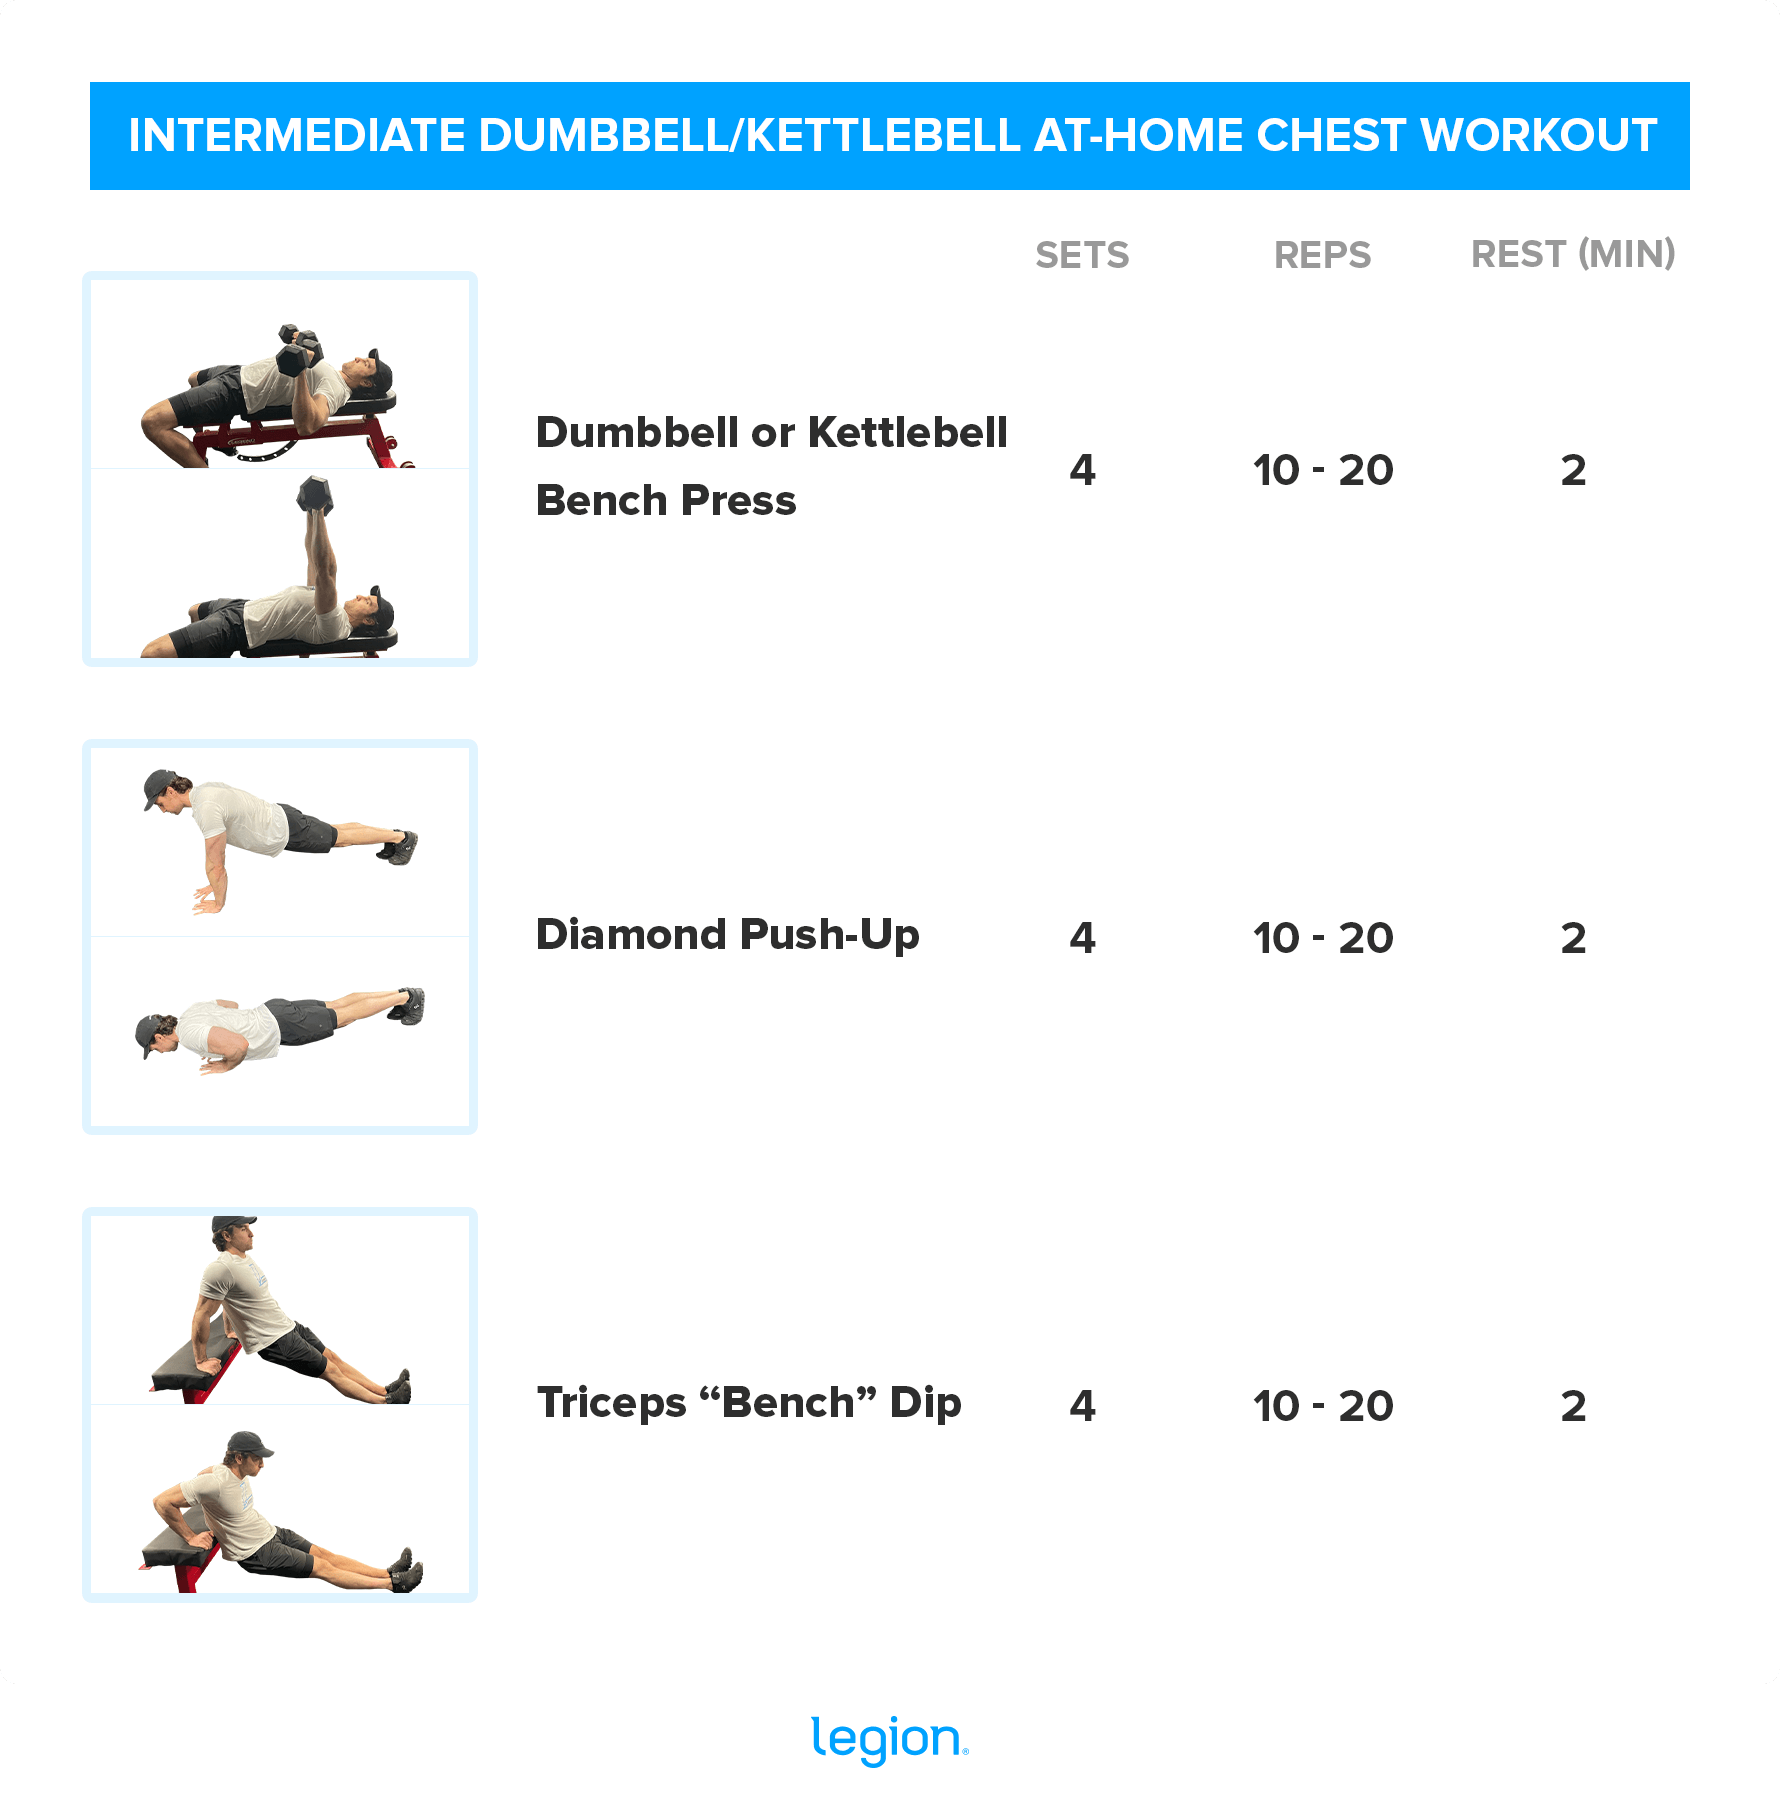 INTERMEDIATE DUMBBELL/KETTLEBELL AT-HOME CHEST WORKOUT